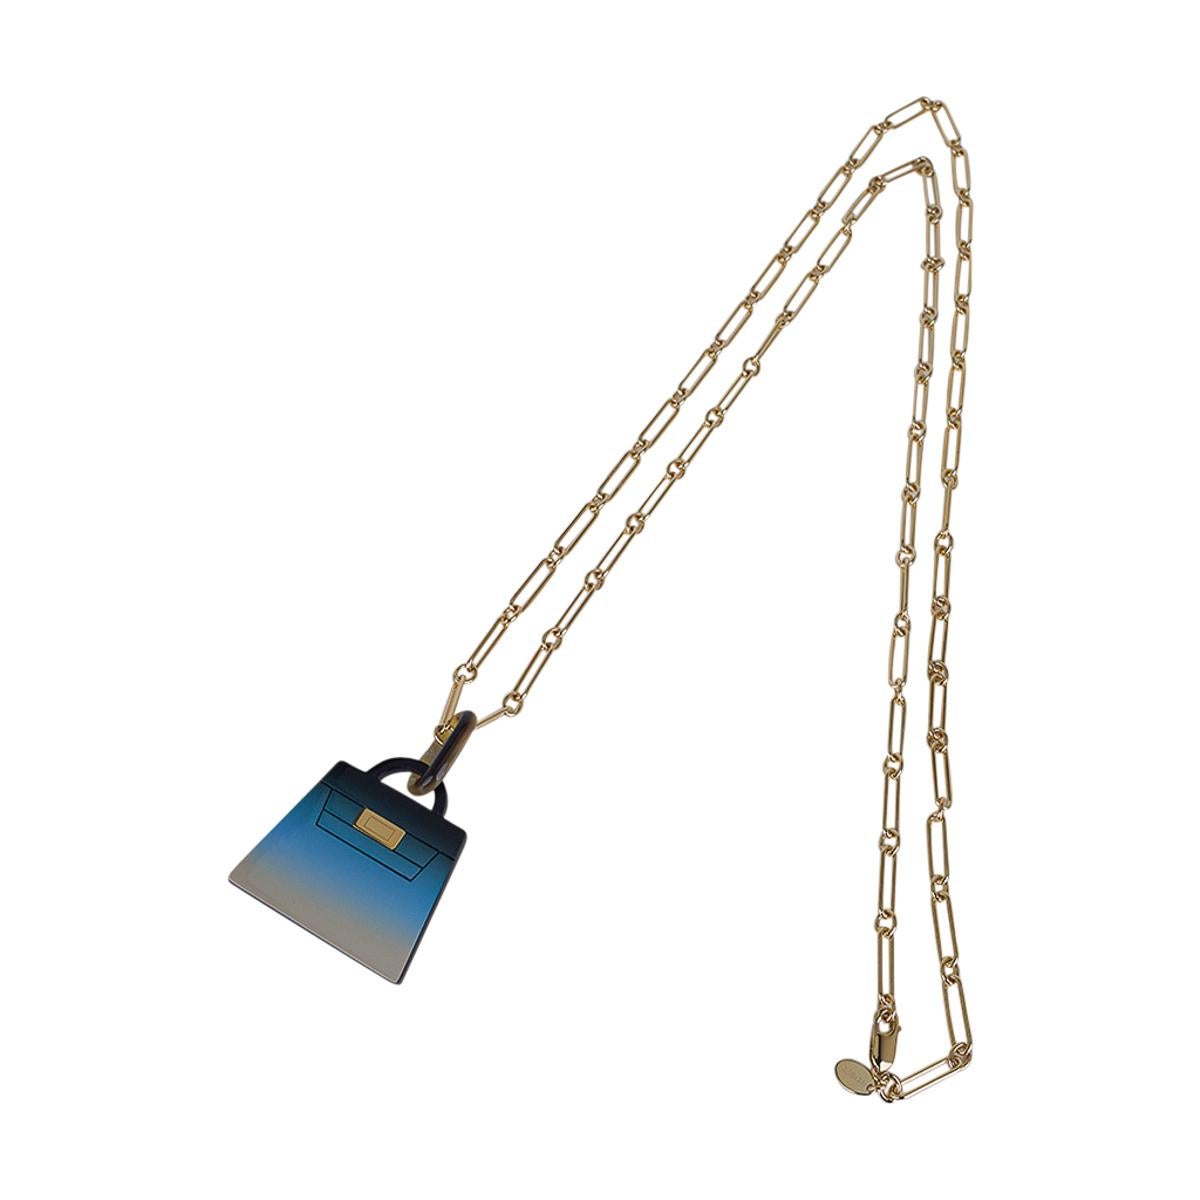 Mightychic offers an Hermes Fusion Kelly Pendant necklace featured in By The Sea.
Beautifully lacquered in hues of blue to beach sand.
This special lacquer technique is accentuated with a Permabrass chain link necklace.
Beautiful and unmistakably